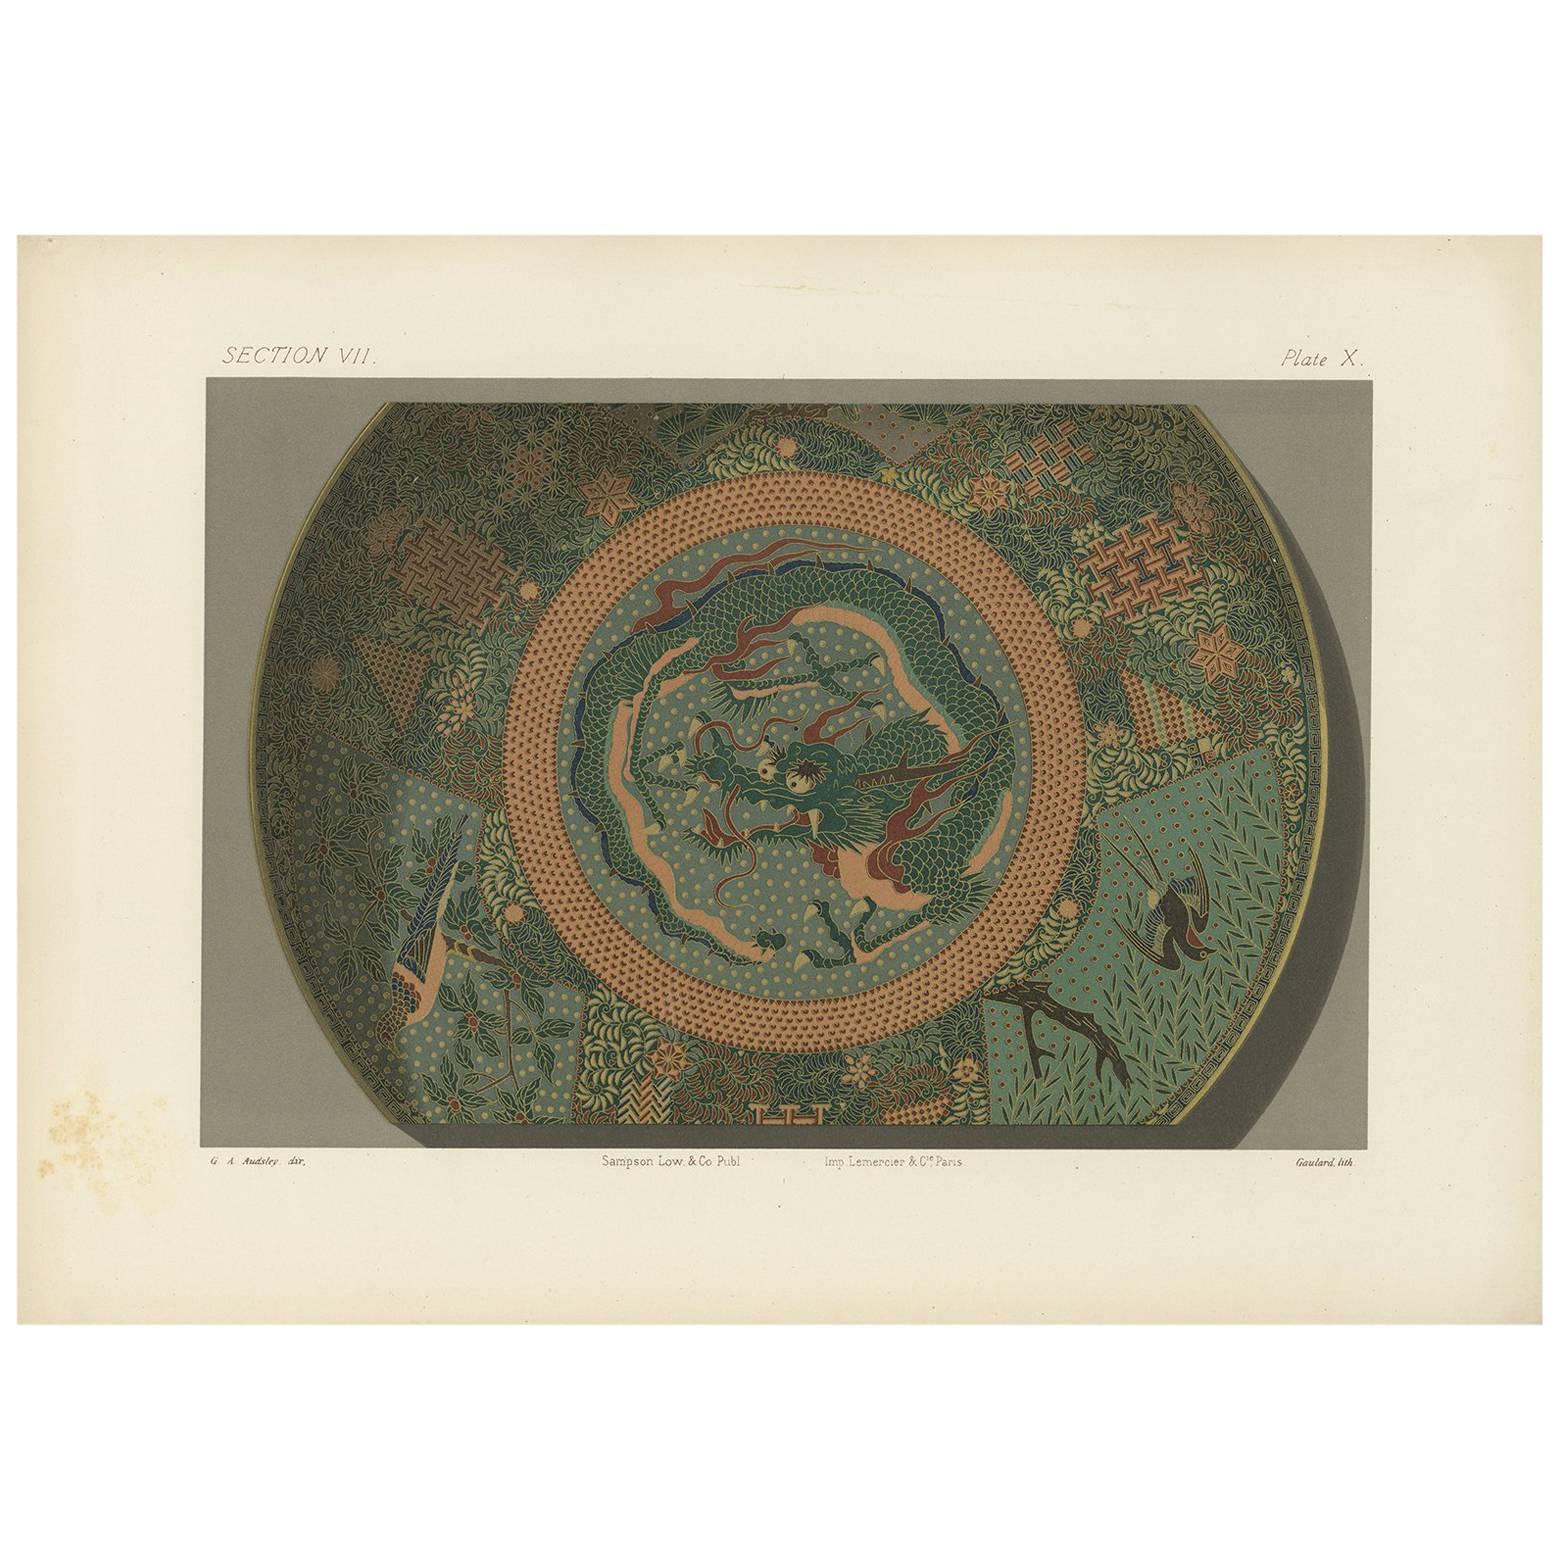 Antique Print of a Sara 'Japanese Dish III' by G. Audsley, 1884